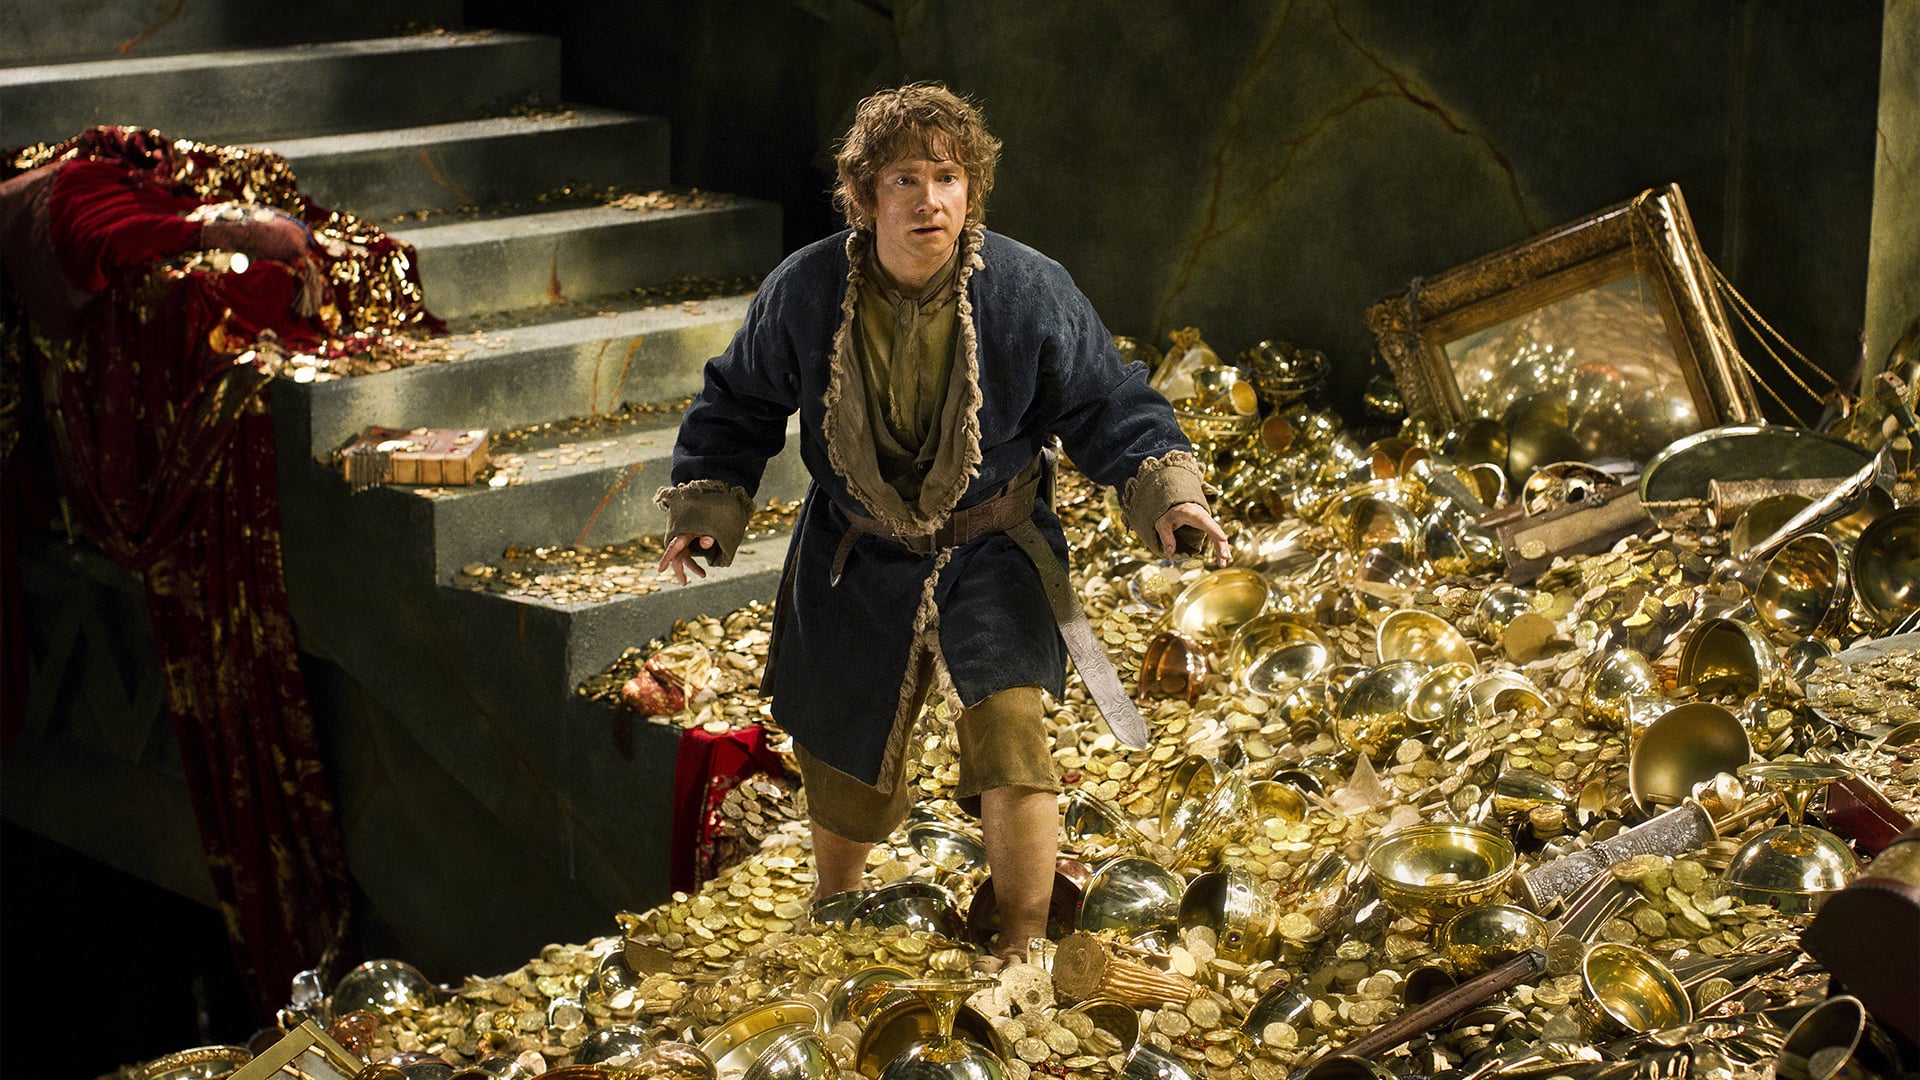 Bilbo Baggins (Martin Freeman) enters into the Lonely Mountain and dragon's cave in The Hobbit: The Desolation of Smaug (2013)